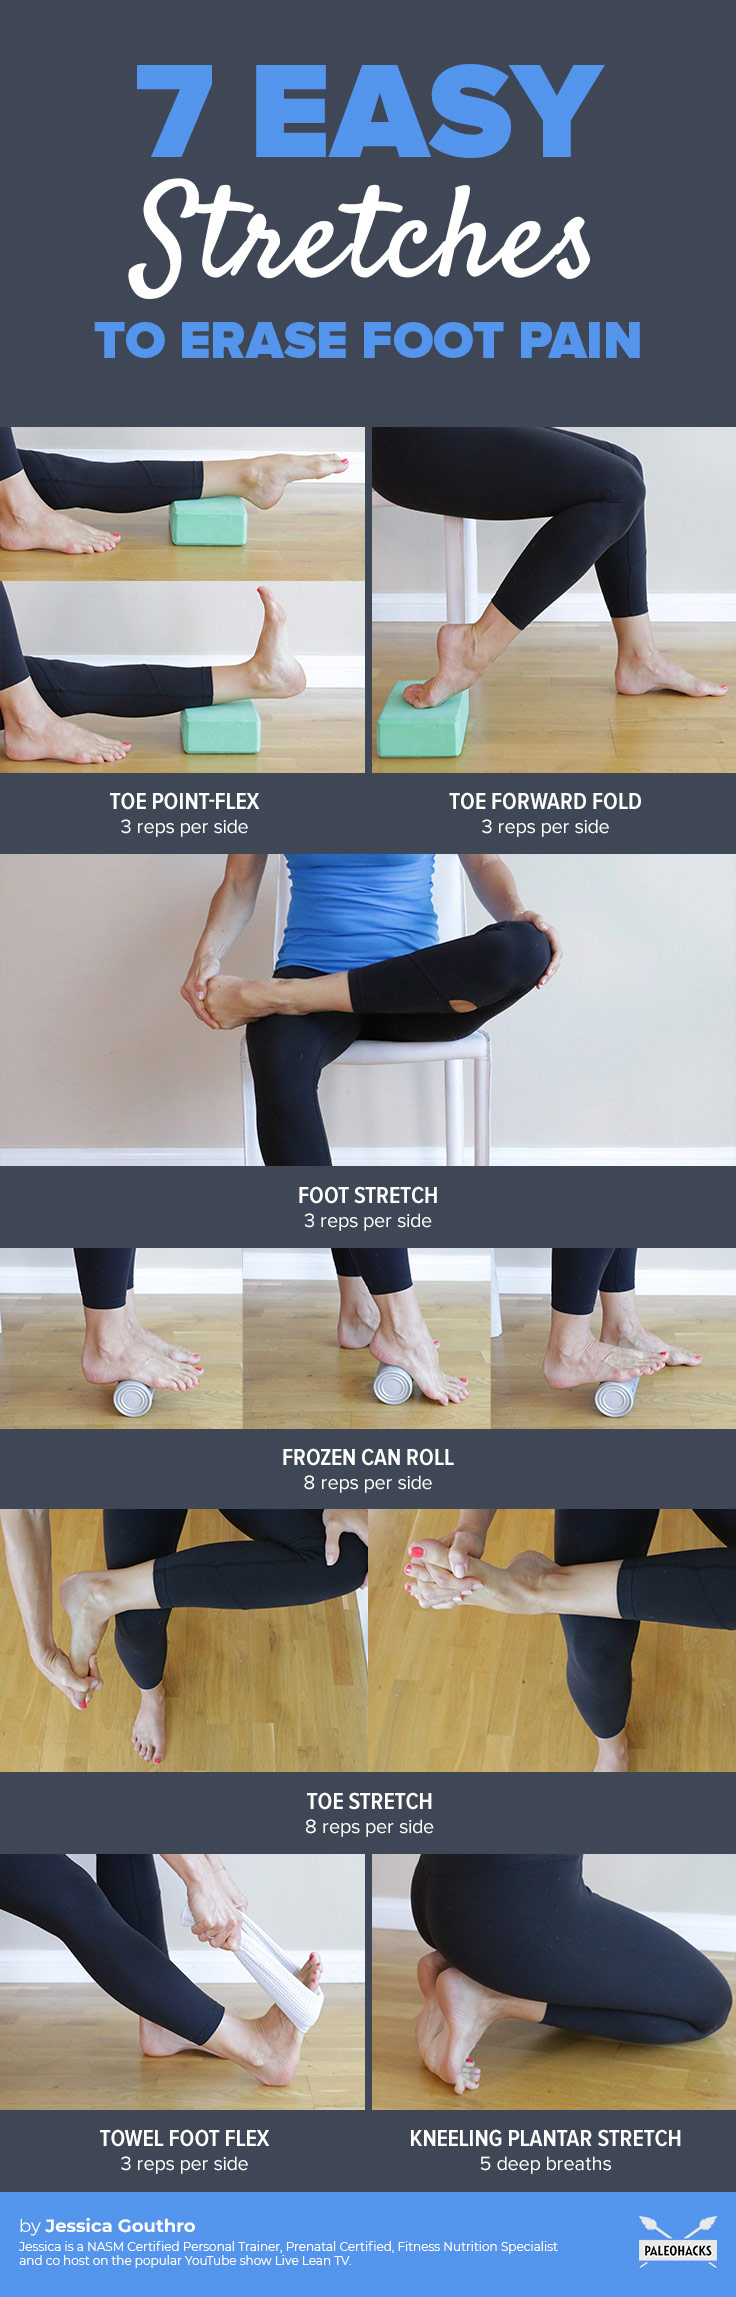 If you’ve been on your toes all day and need some quick relief, try these easy stretches to soothe sore feet.